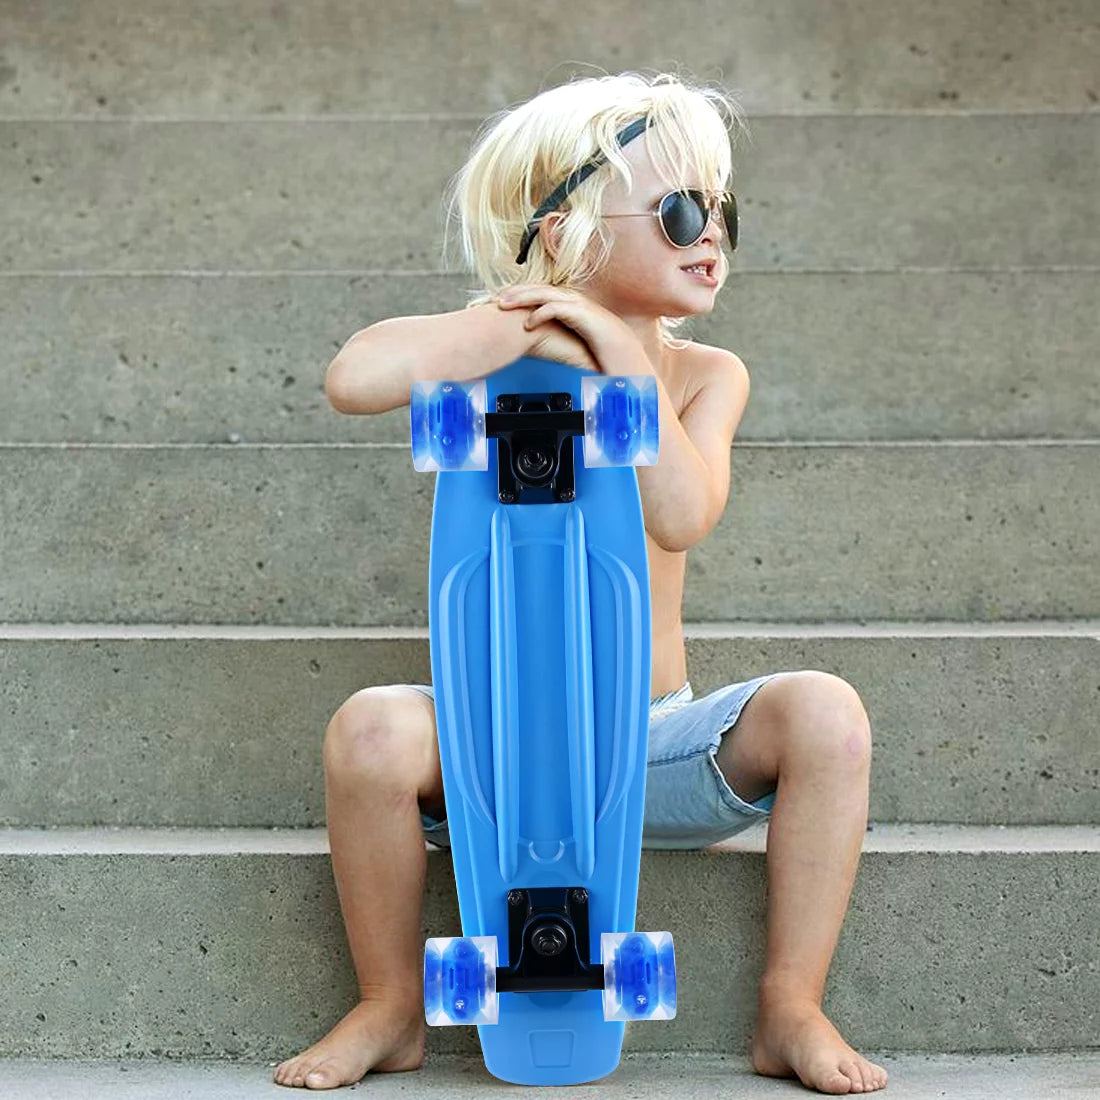 22.8'' Blue Classic Skateboard with Colorful LED Flashing Wheels